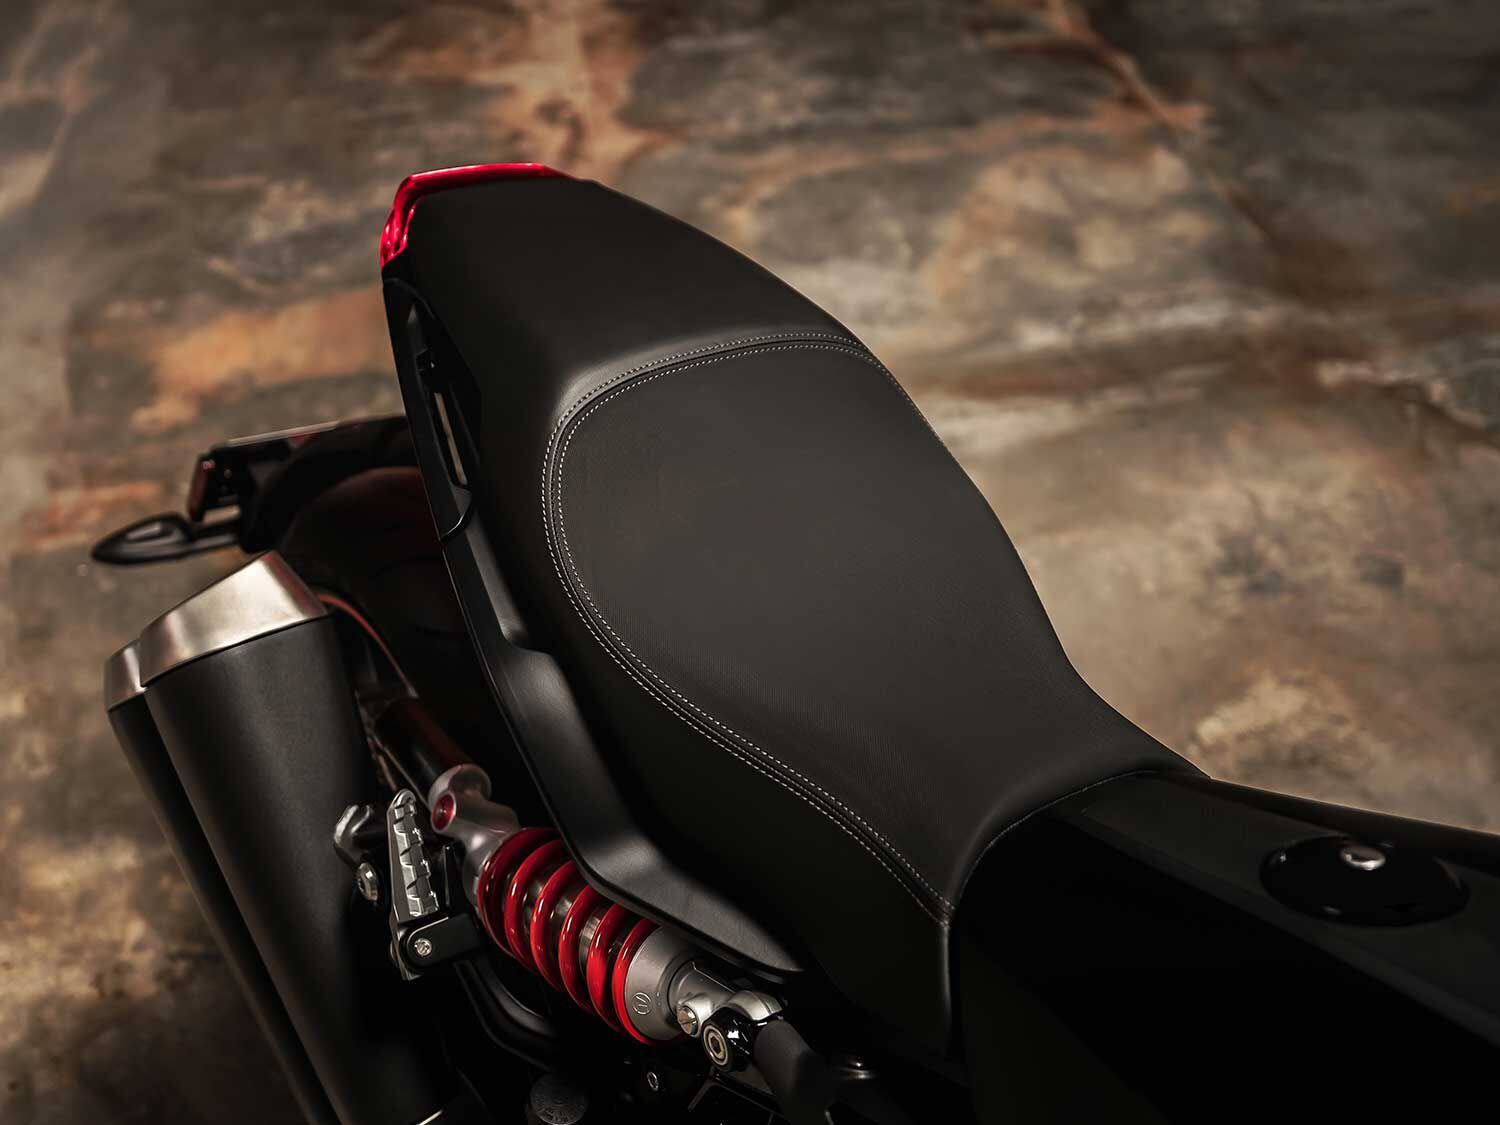 The saddle height has been reduced due to the smaller-diameter wheels and shorter suspension travel.